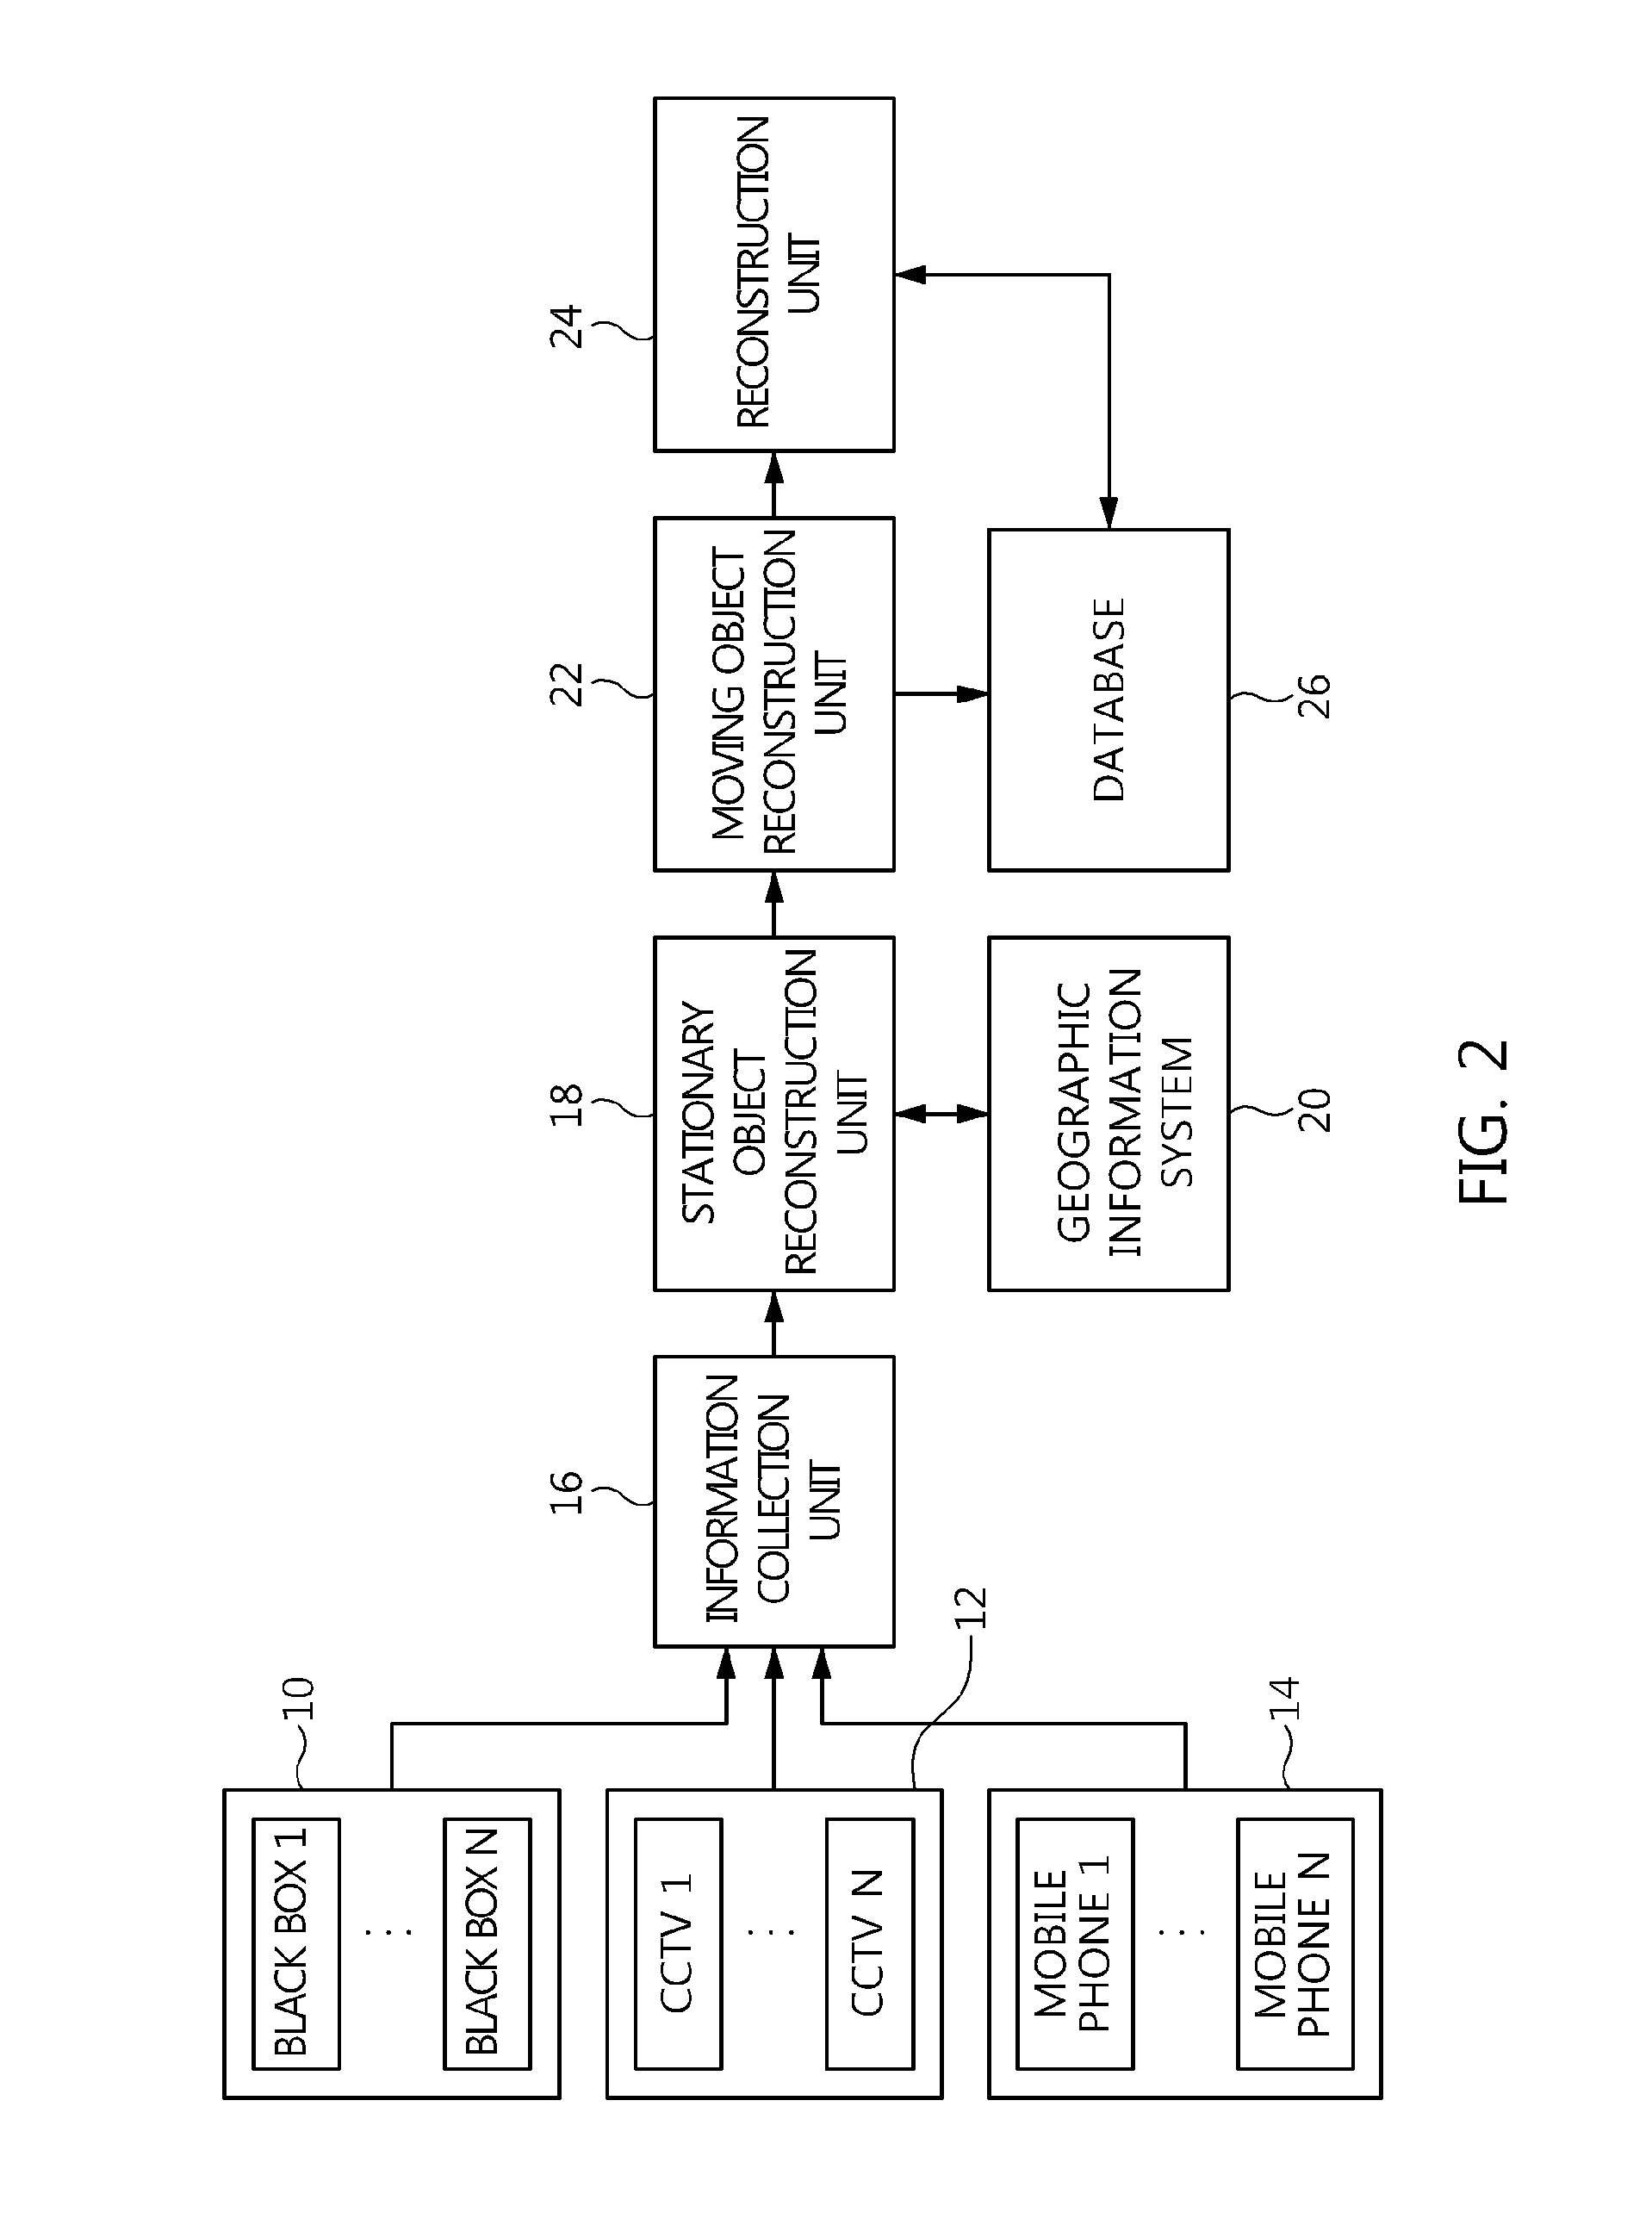 Apparatus and method for reconstructing scene of traffic accident